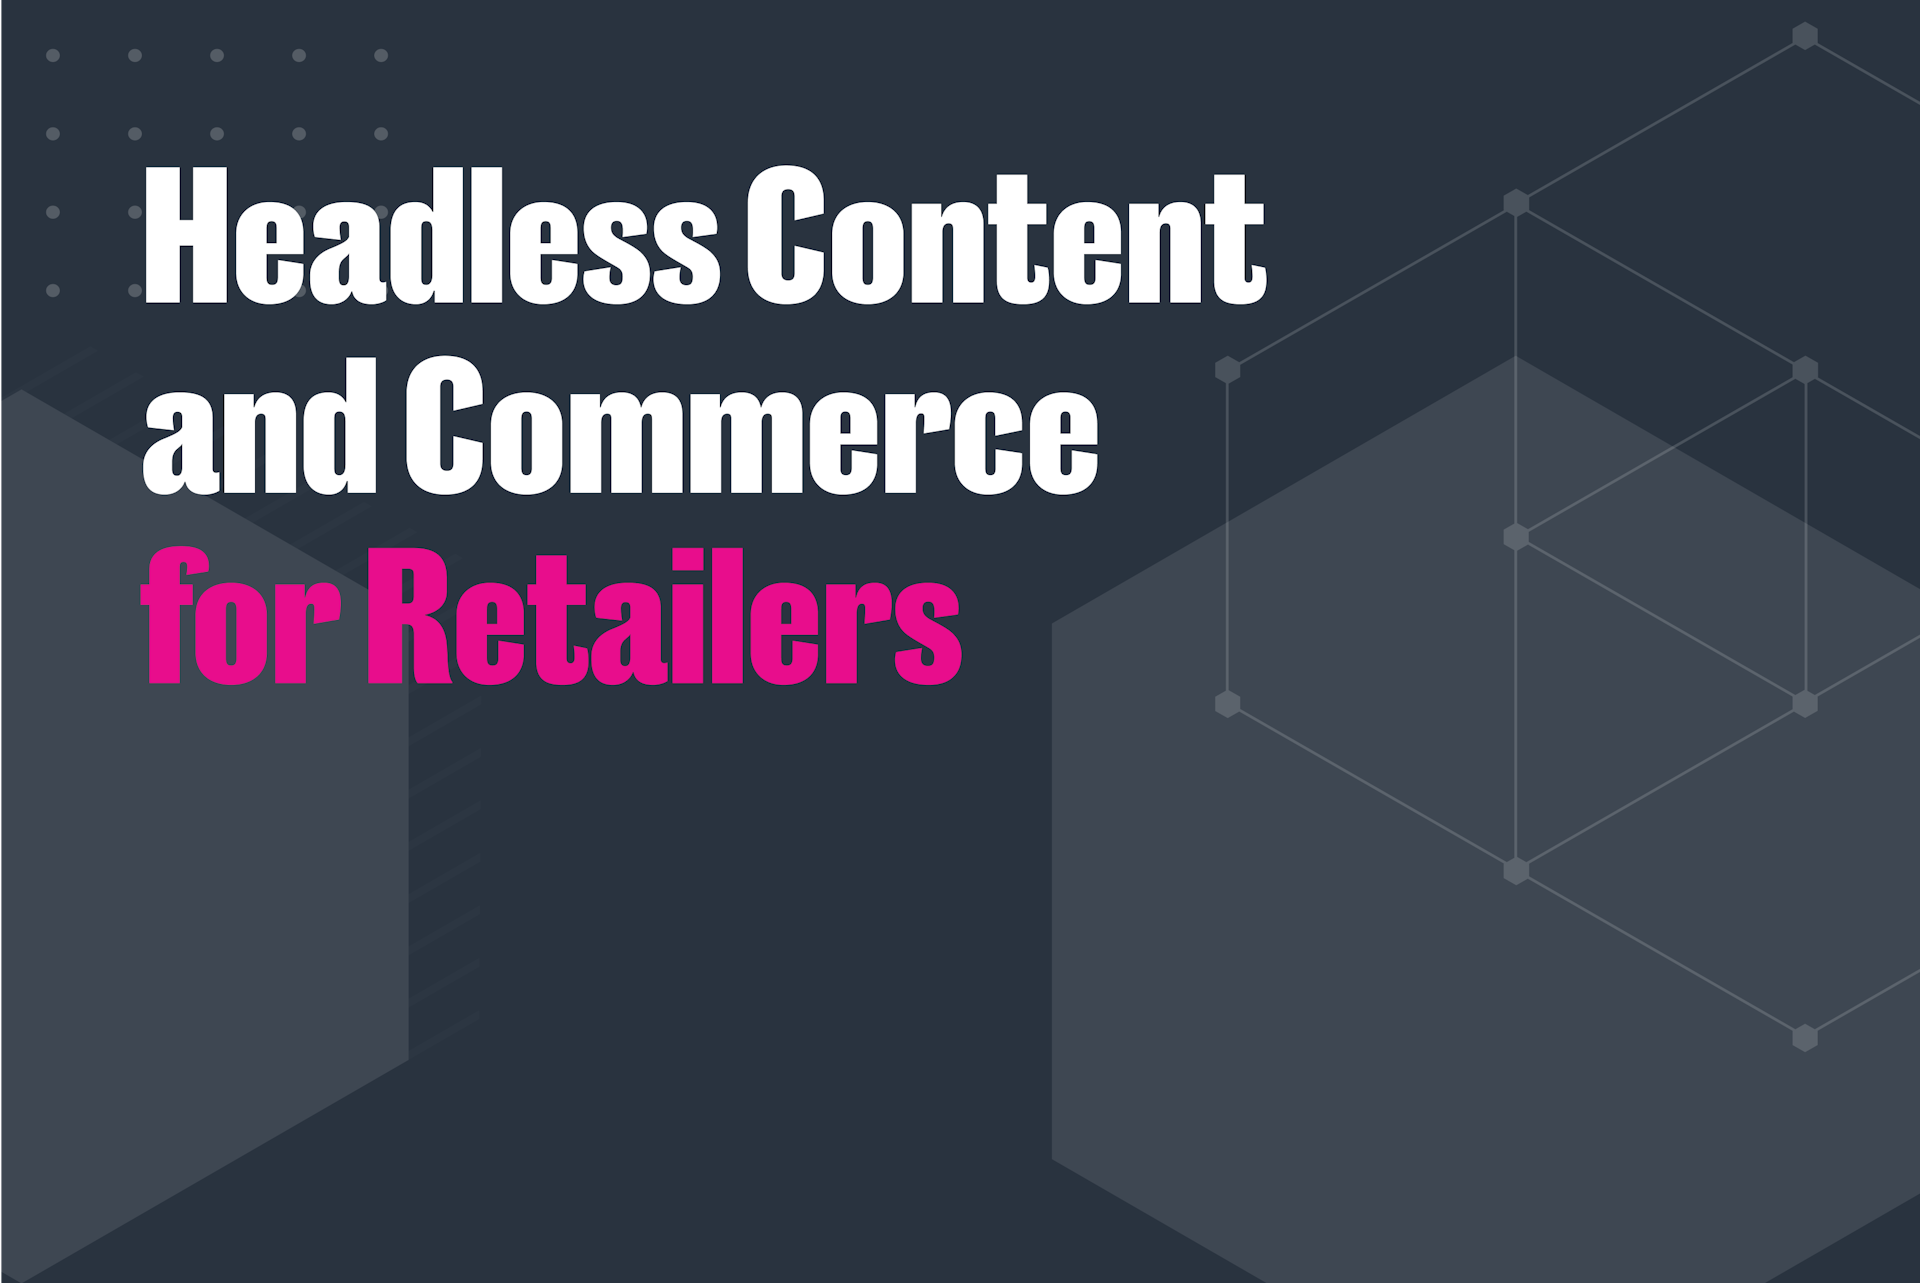 Headless Content and Commerce for Retailers